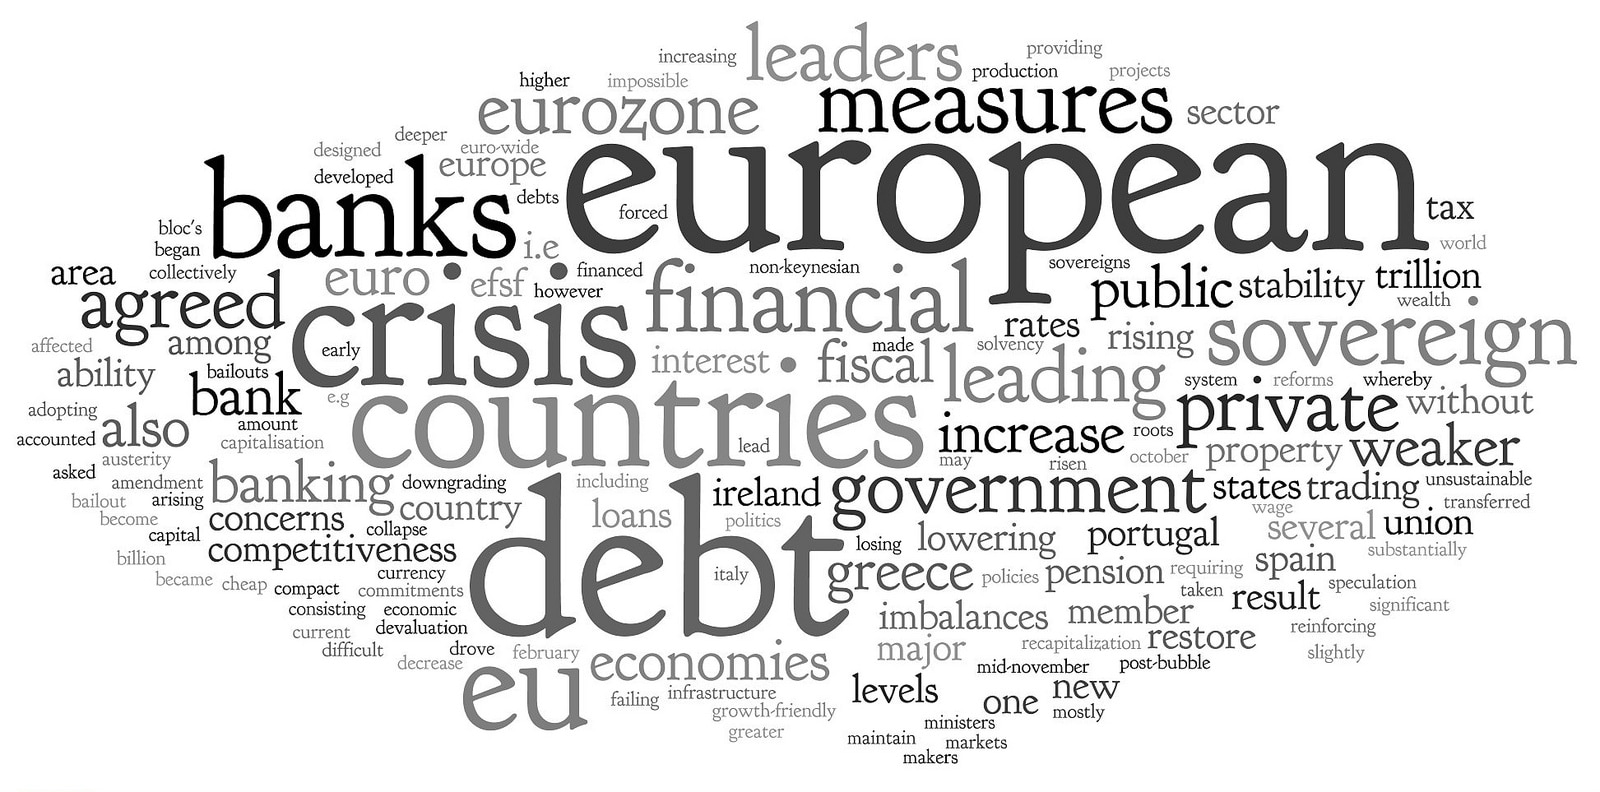 Tag cloud di EuroCrisisExplained .co.uk su Flickr, licenza CC BY 2.0.